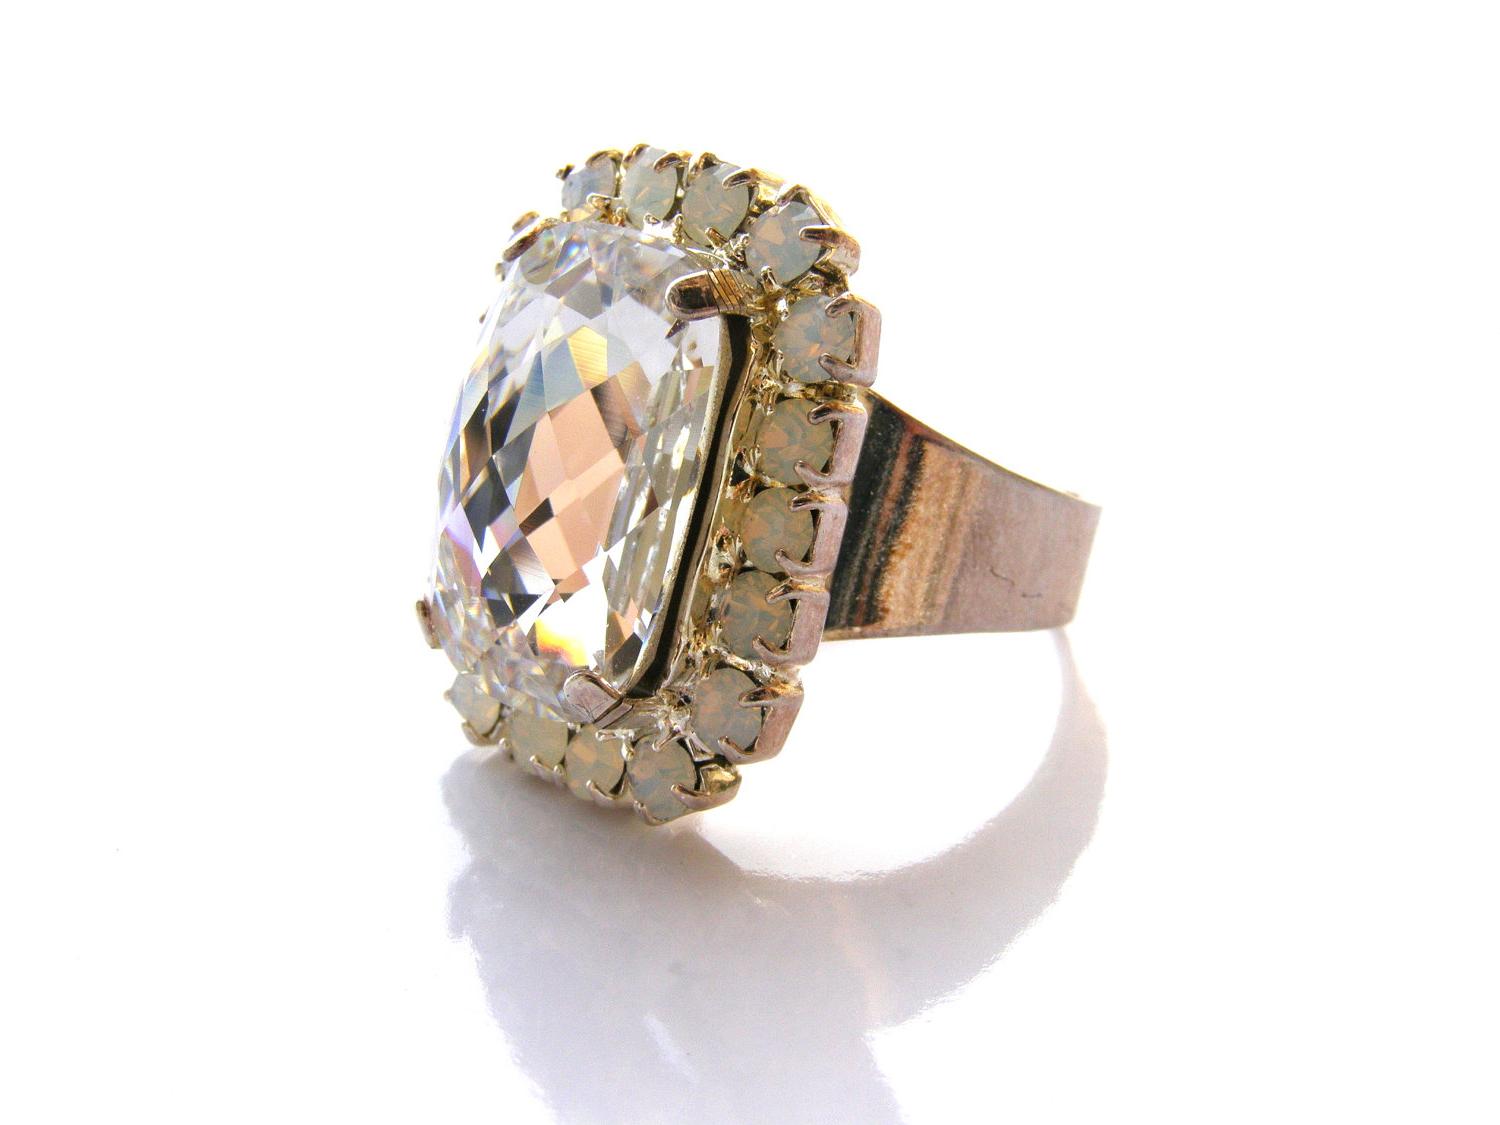 Swarovski Crystal Ring- CHRISTMAS SALE - 15  OFF. From AquamarineJewelry